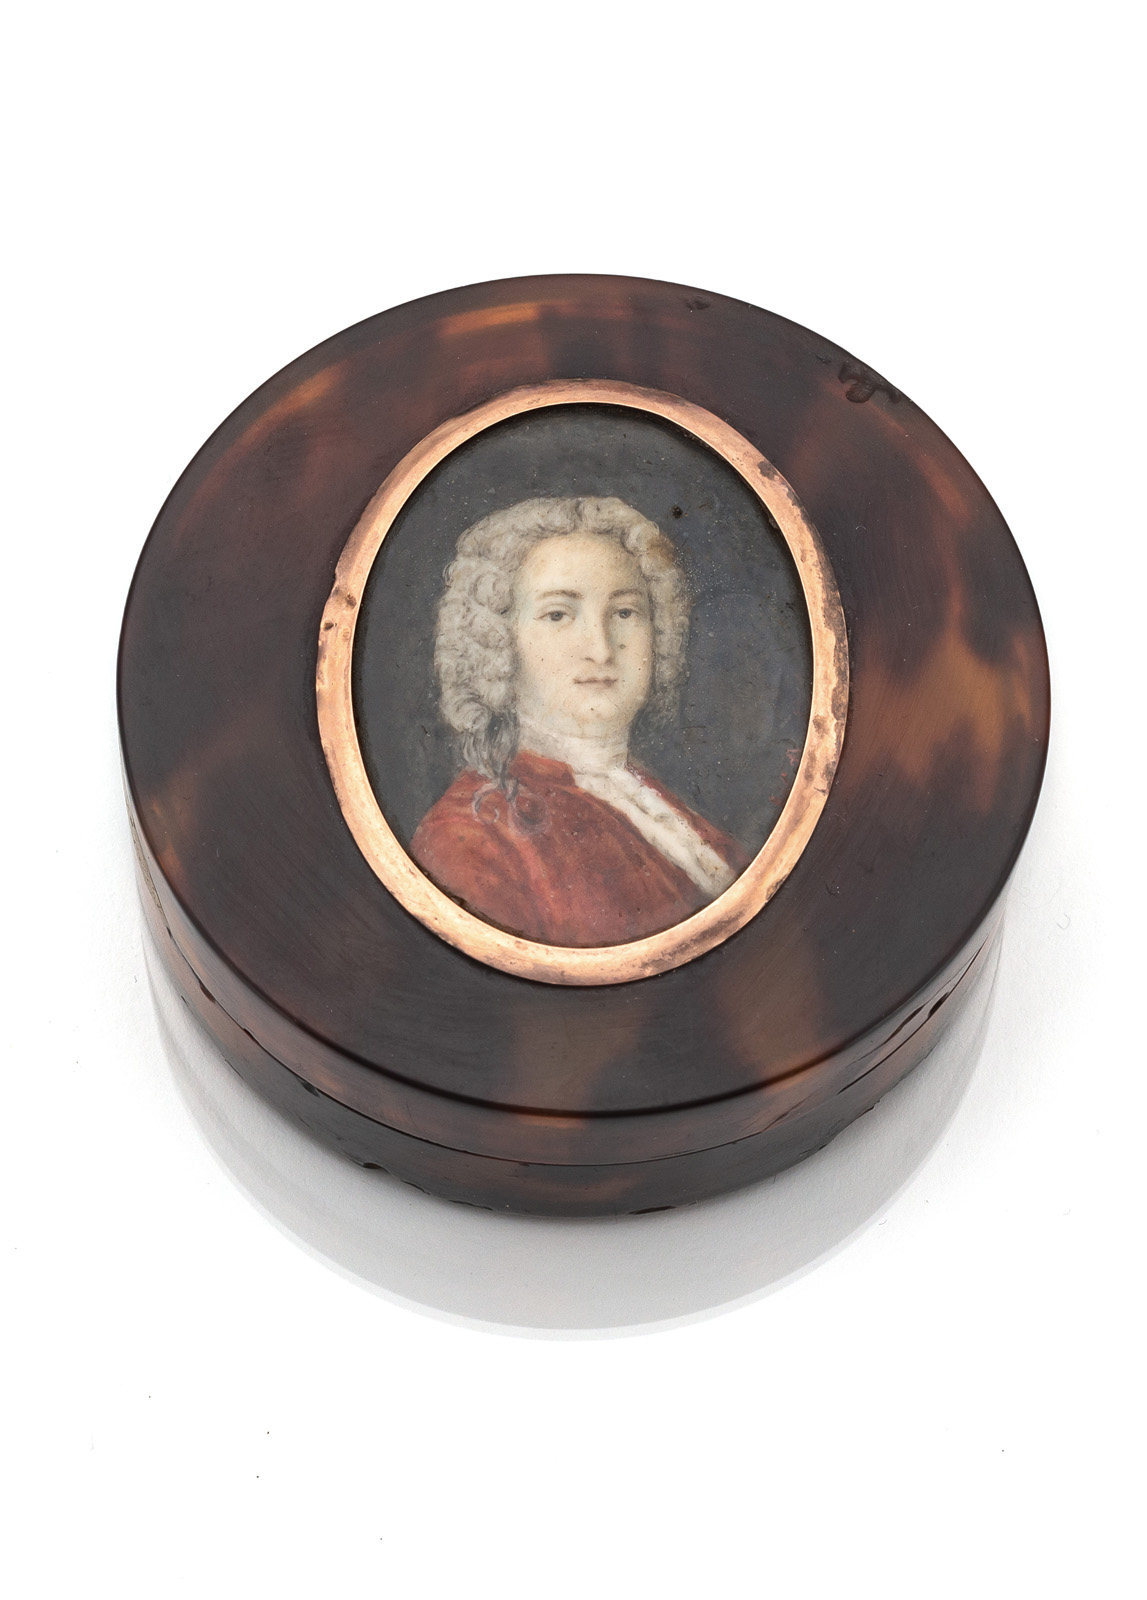 A TORTOISESHELL TABATIERE WITH A PORTRAIT MINIATURE OF A GENTLEMAN